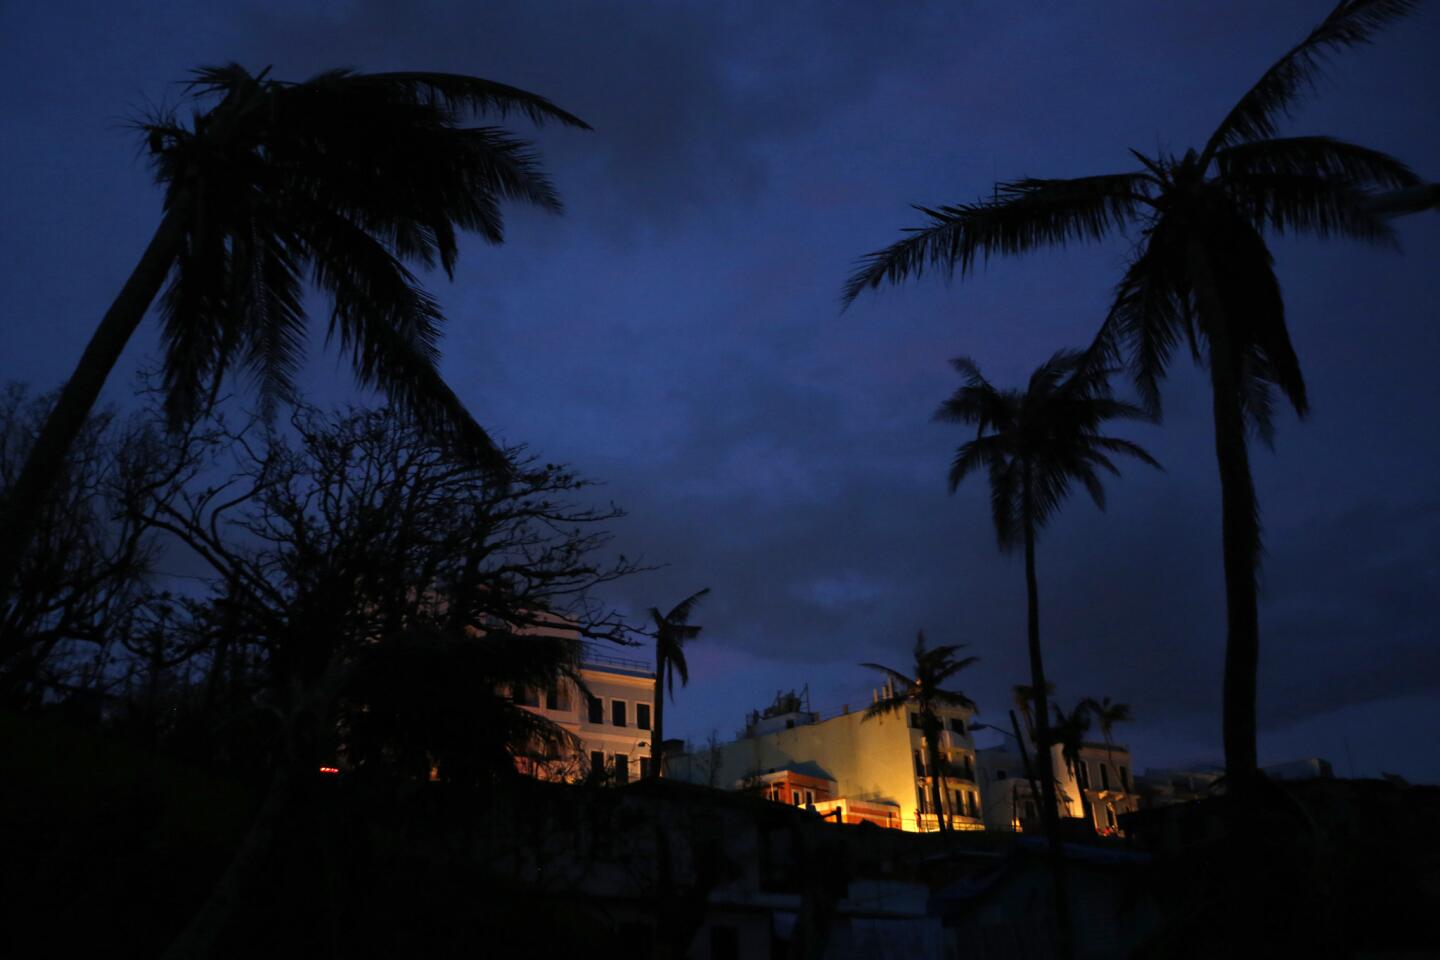 Wide swaths of Puerto Rico remained without power.